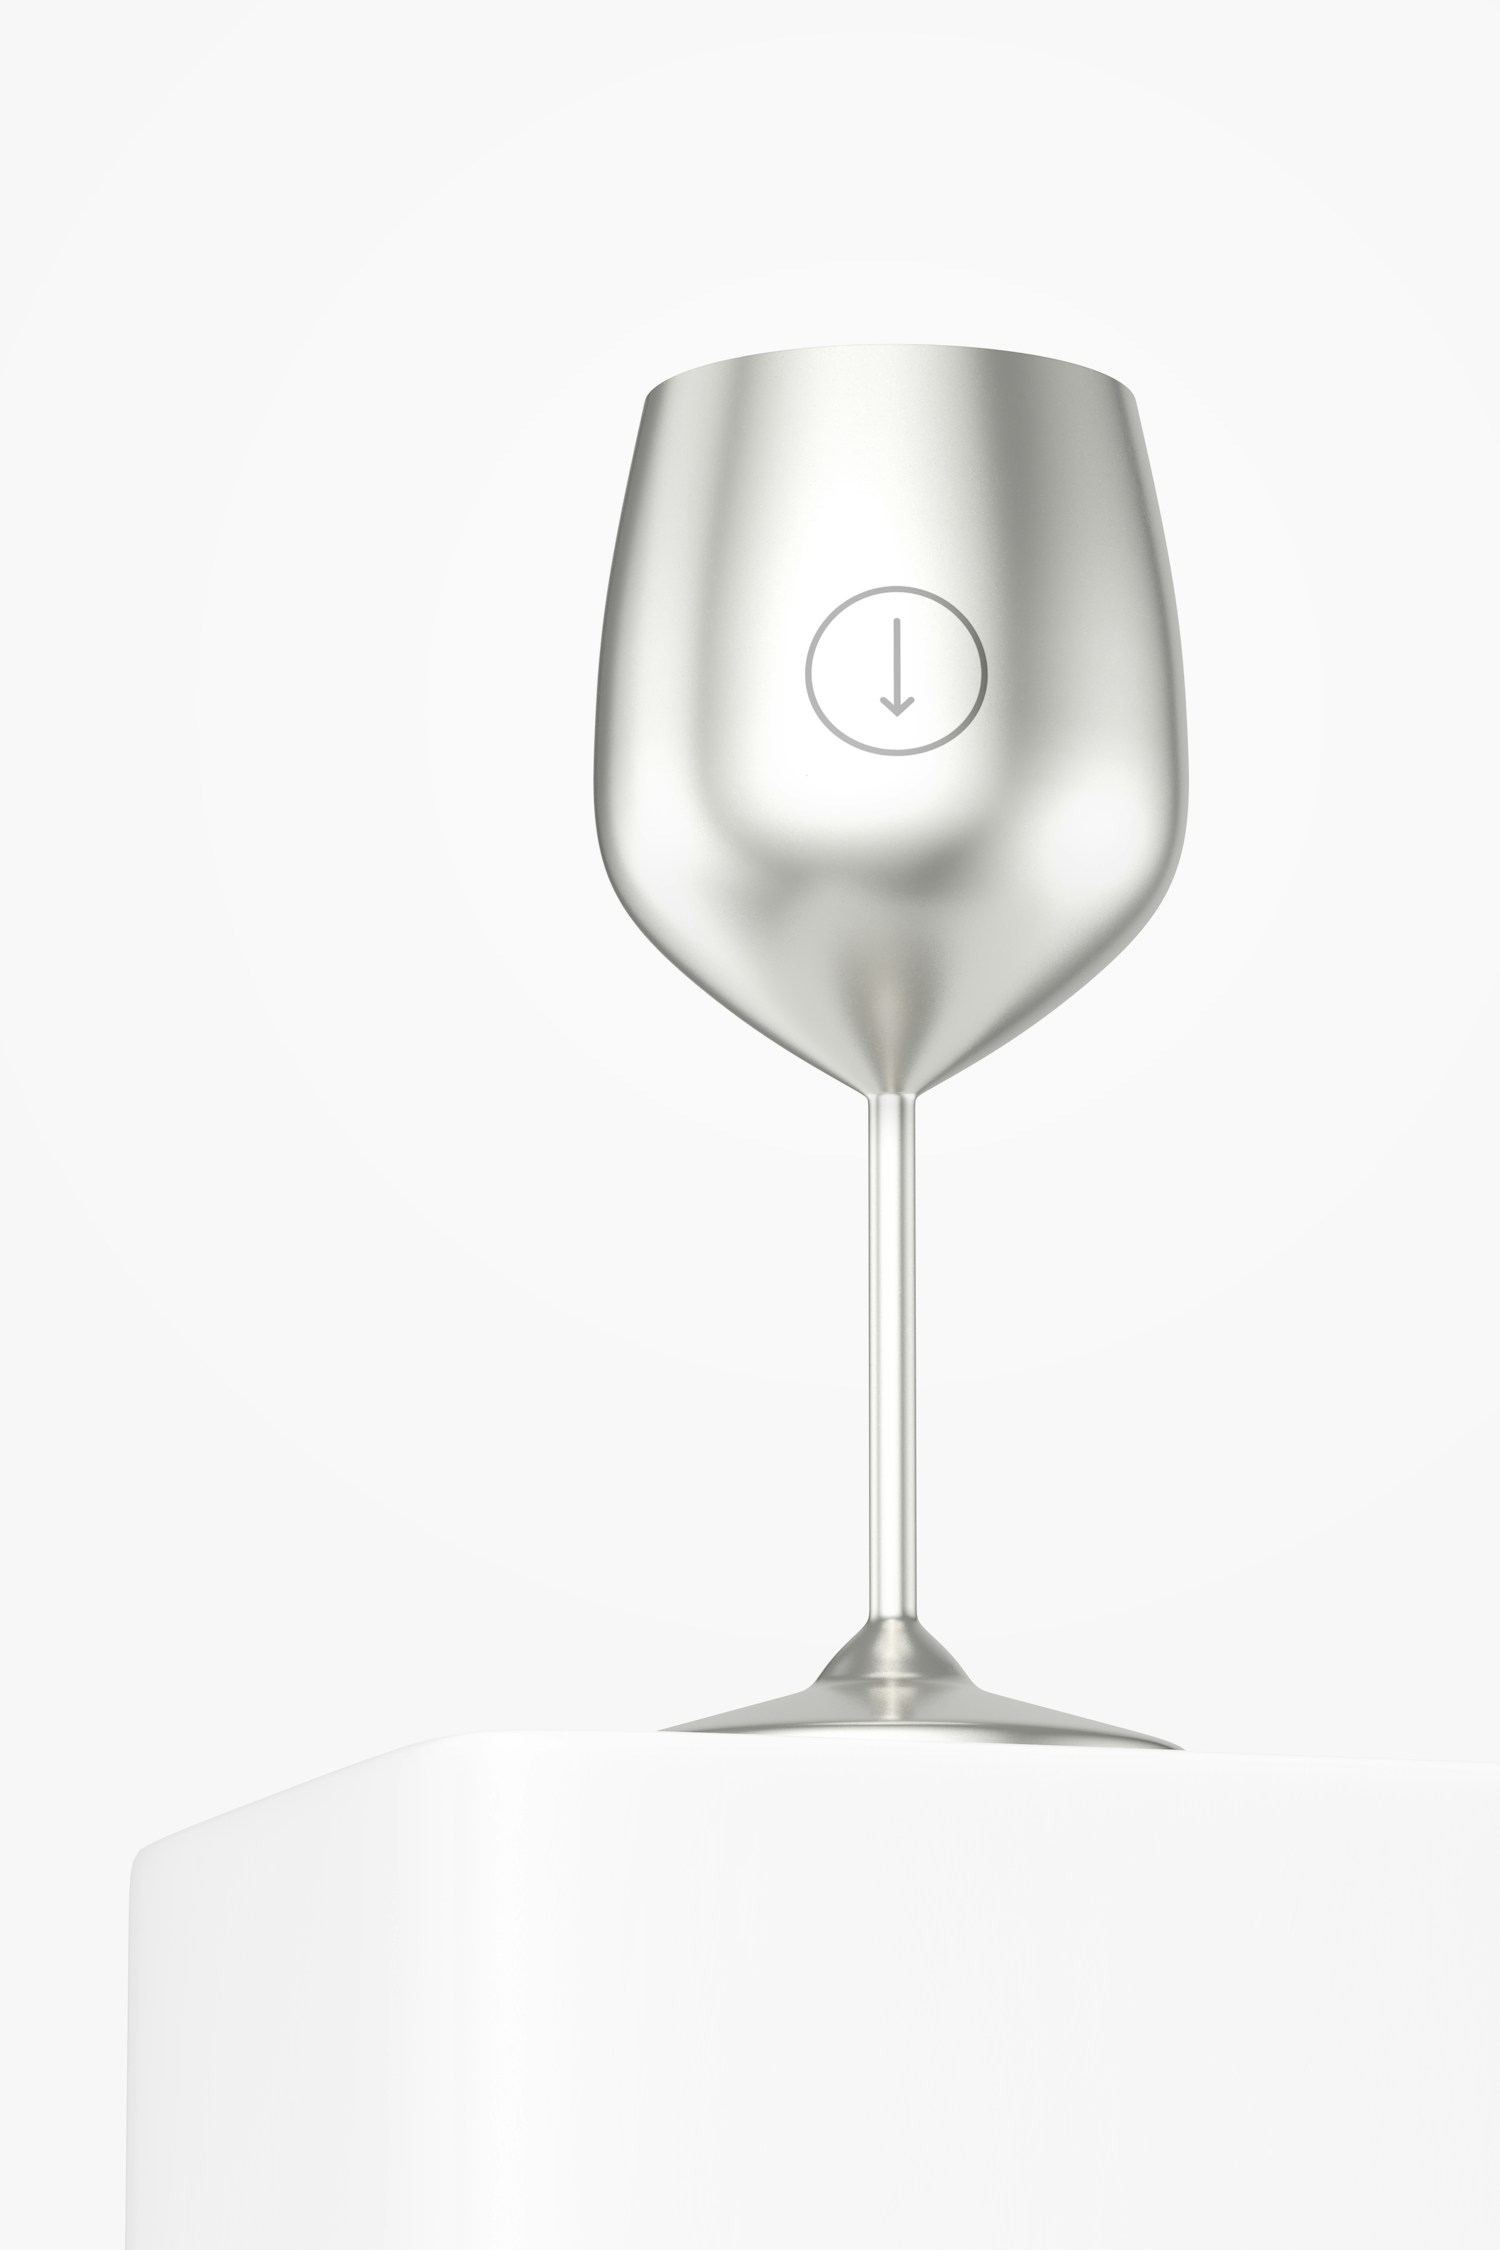 Stainless Steel Wine Glass Mockup, Low Angle View